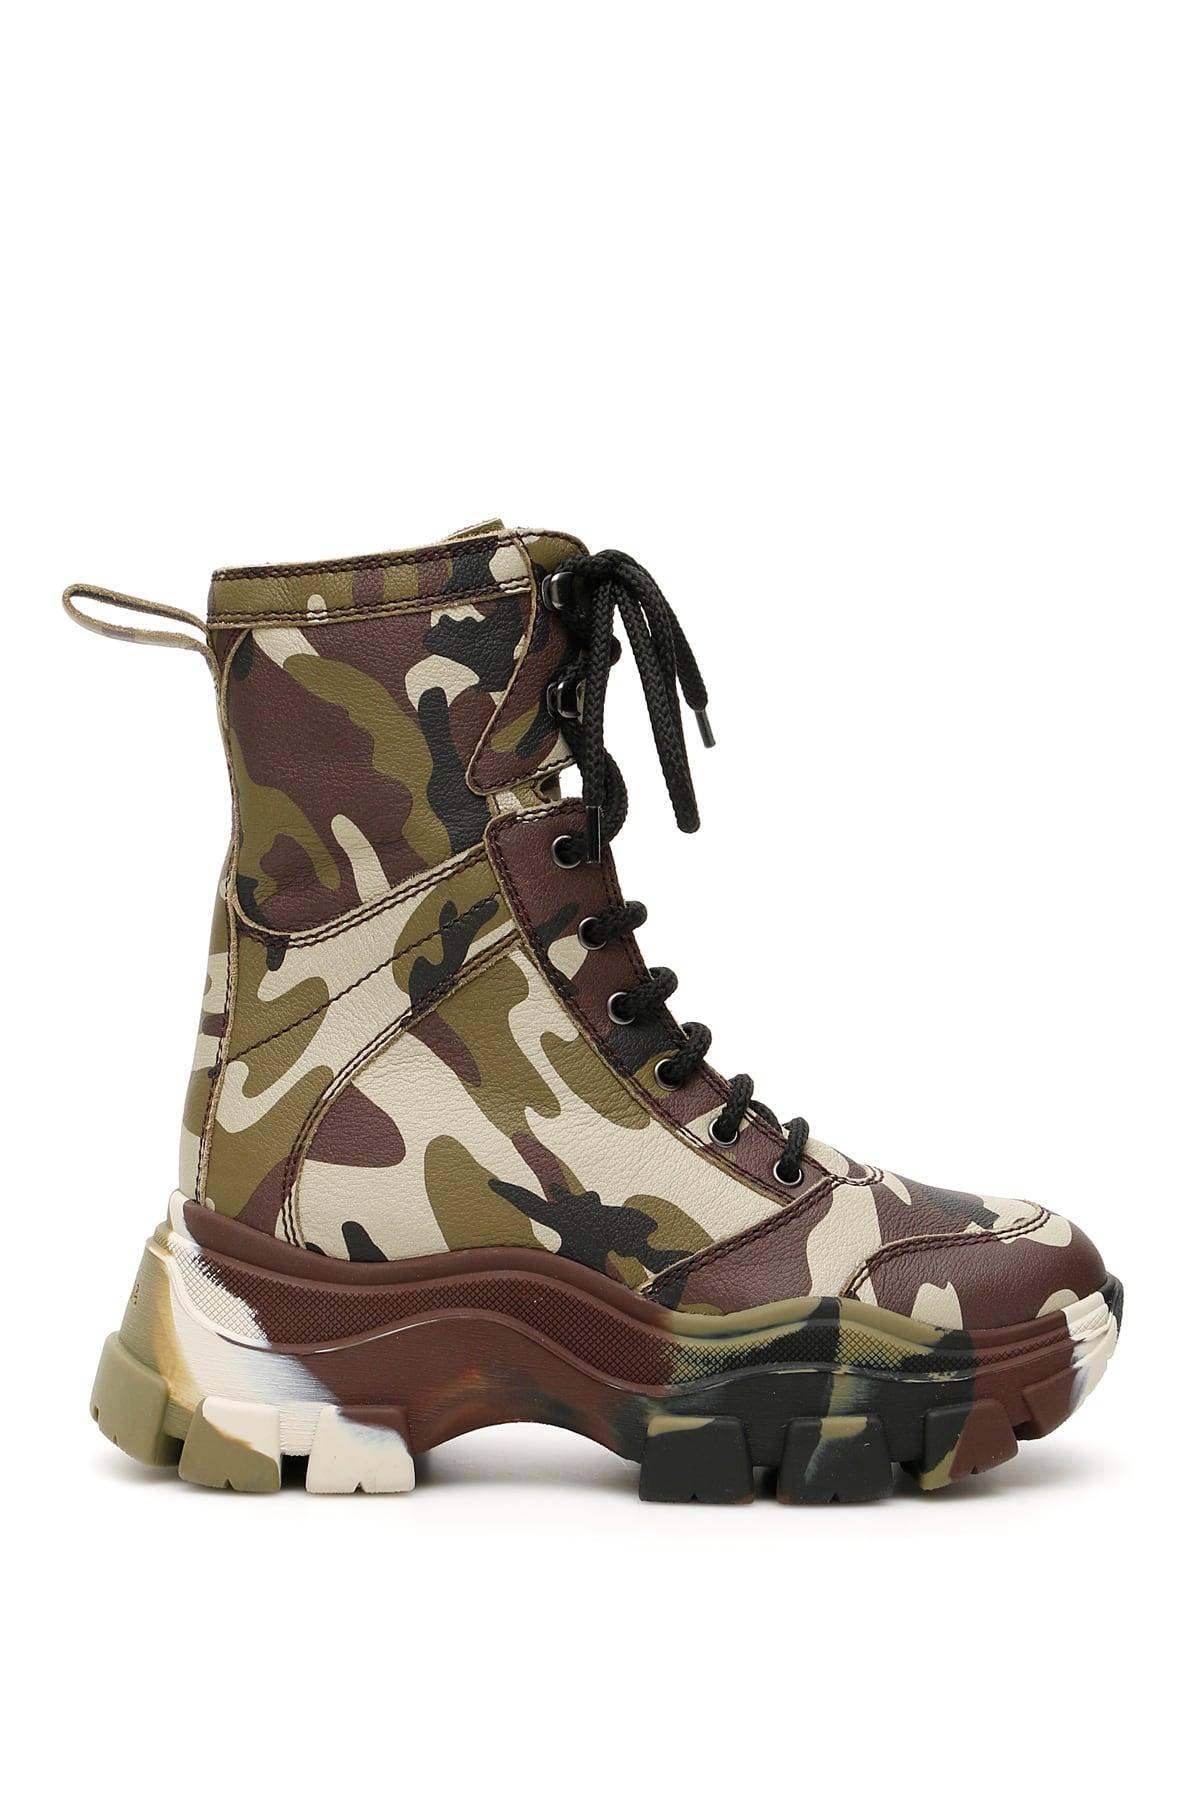 Prada Leather Camouflage Combat Boots in Green,Brown,Beige (Green) | Lyst